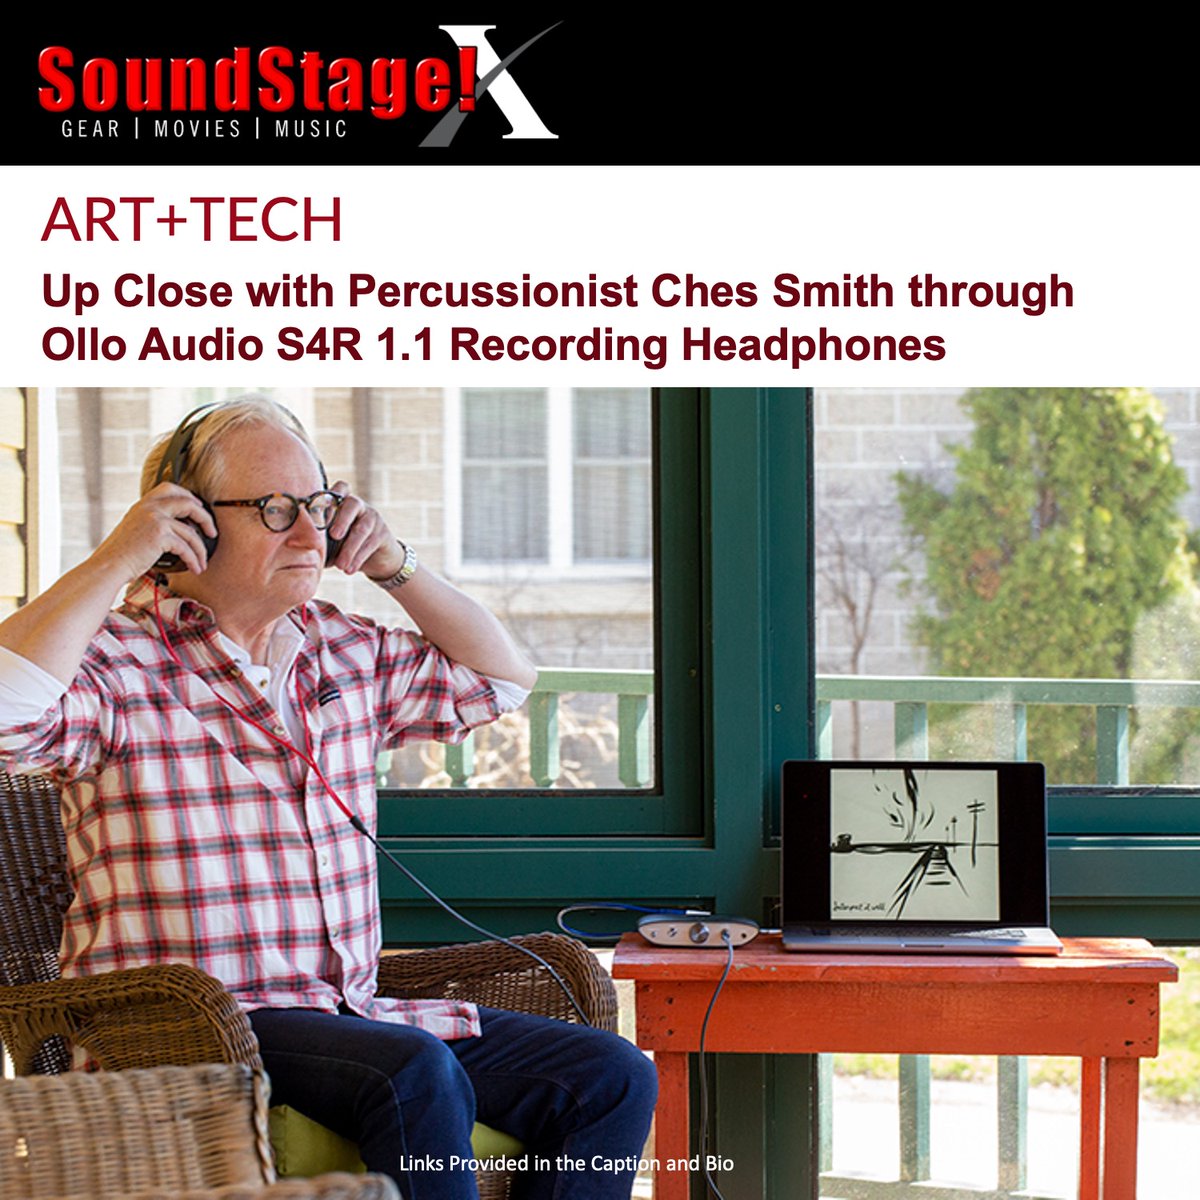 'Interpret It Well really pays dividends on close listening.” - @JamesHale @soundstagenet Order Ches Smith's Album “Interpret It Well” from Bandcamp at chessmithpyroclastic.bandcamp.com